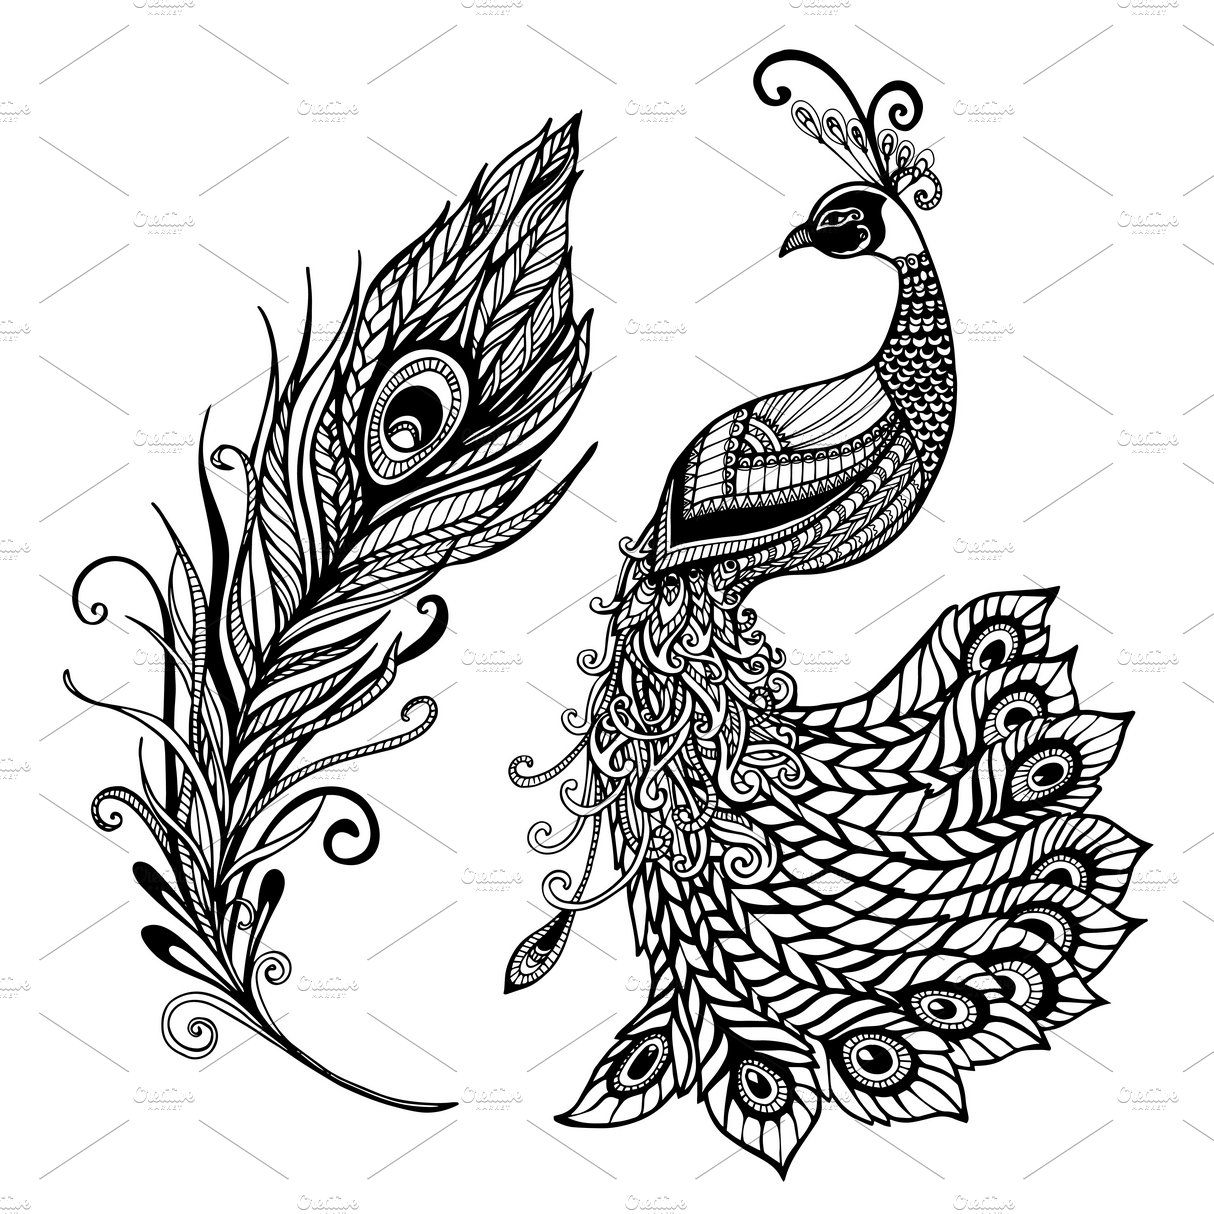 Peacock feather design black print cover image.